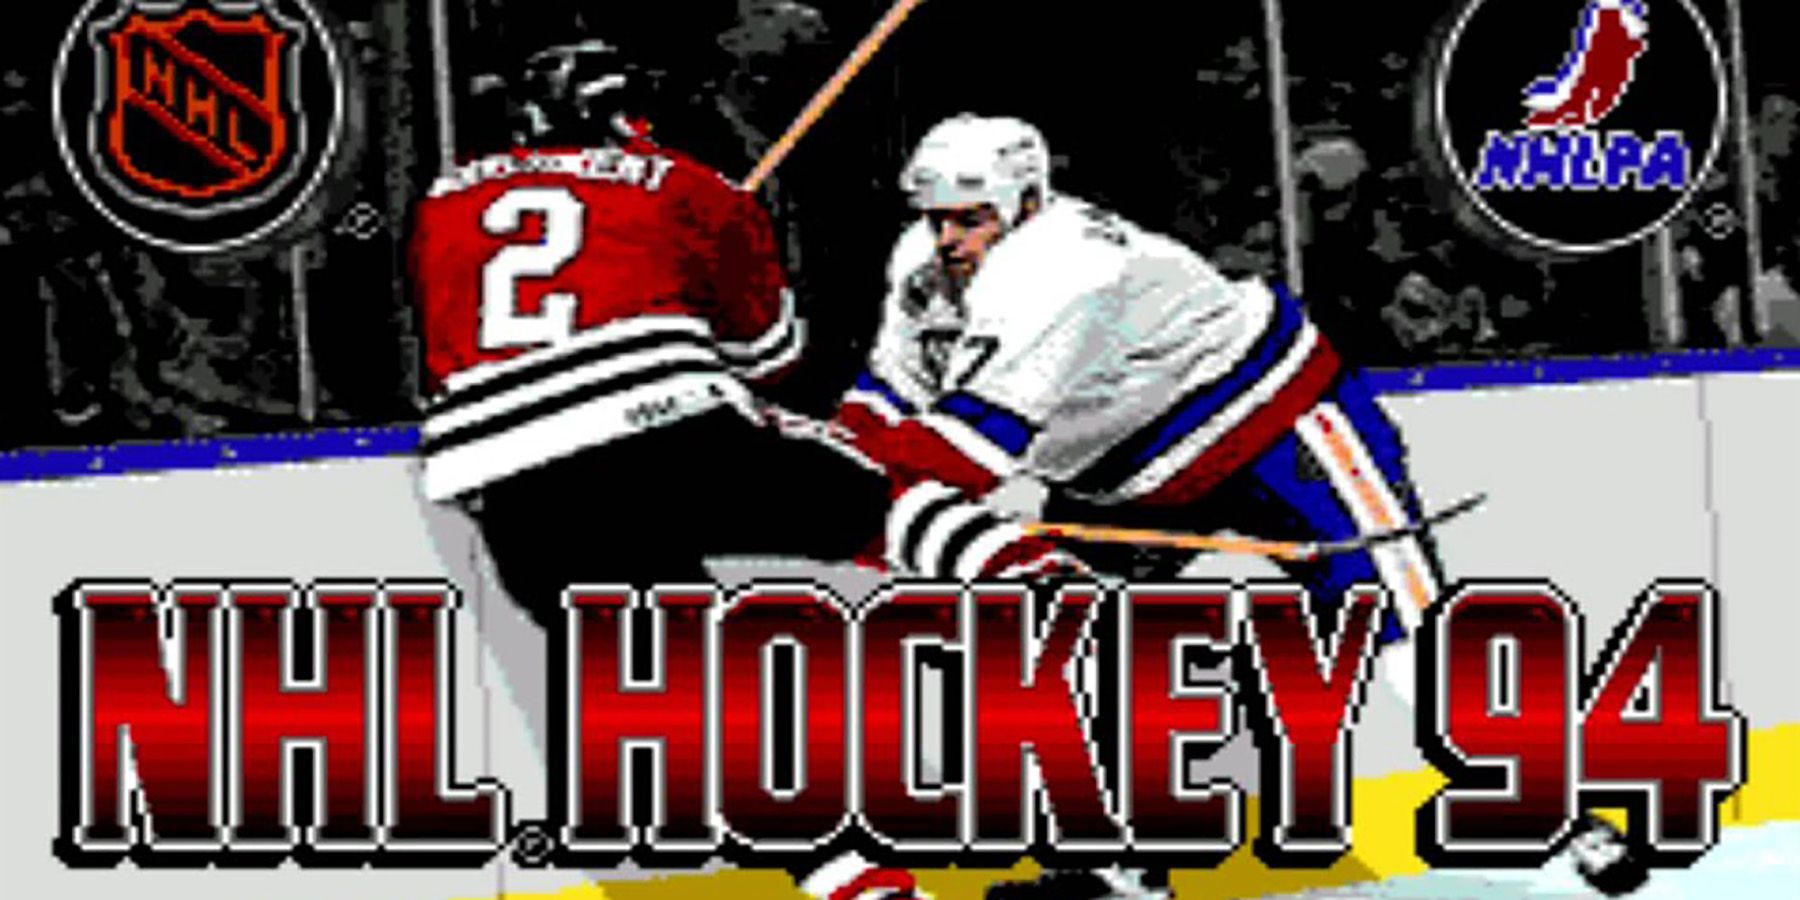 title screen for nhl 94